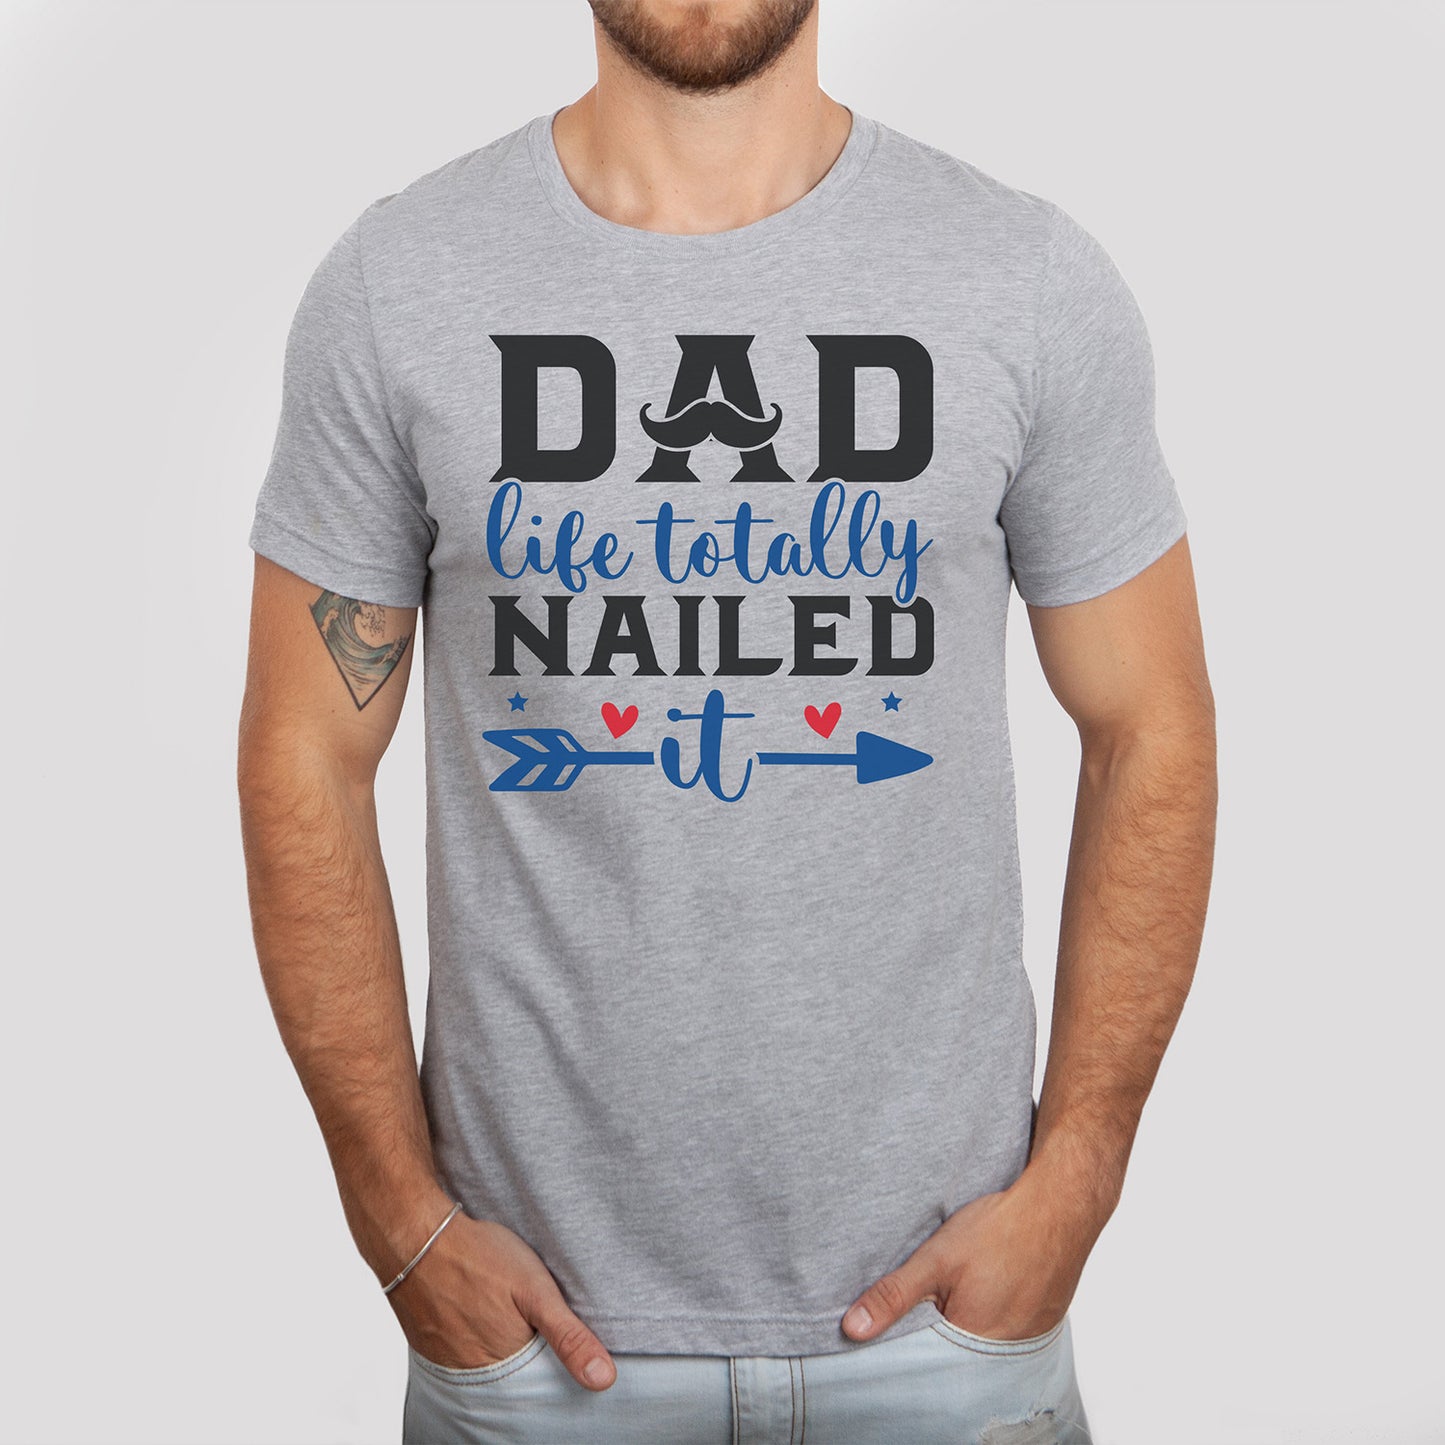 "Dad Life Totally Nailed It" Graphic